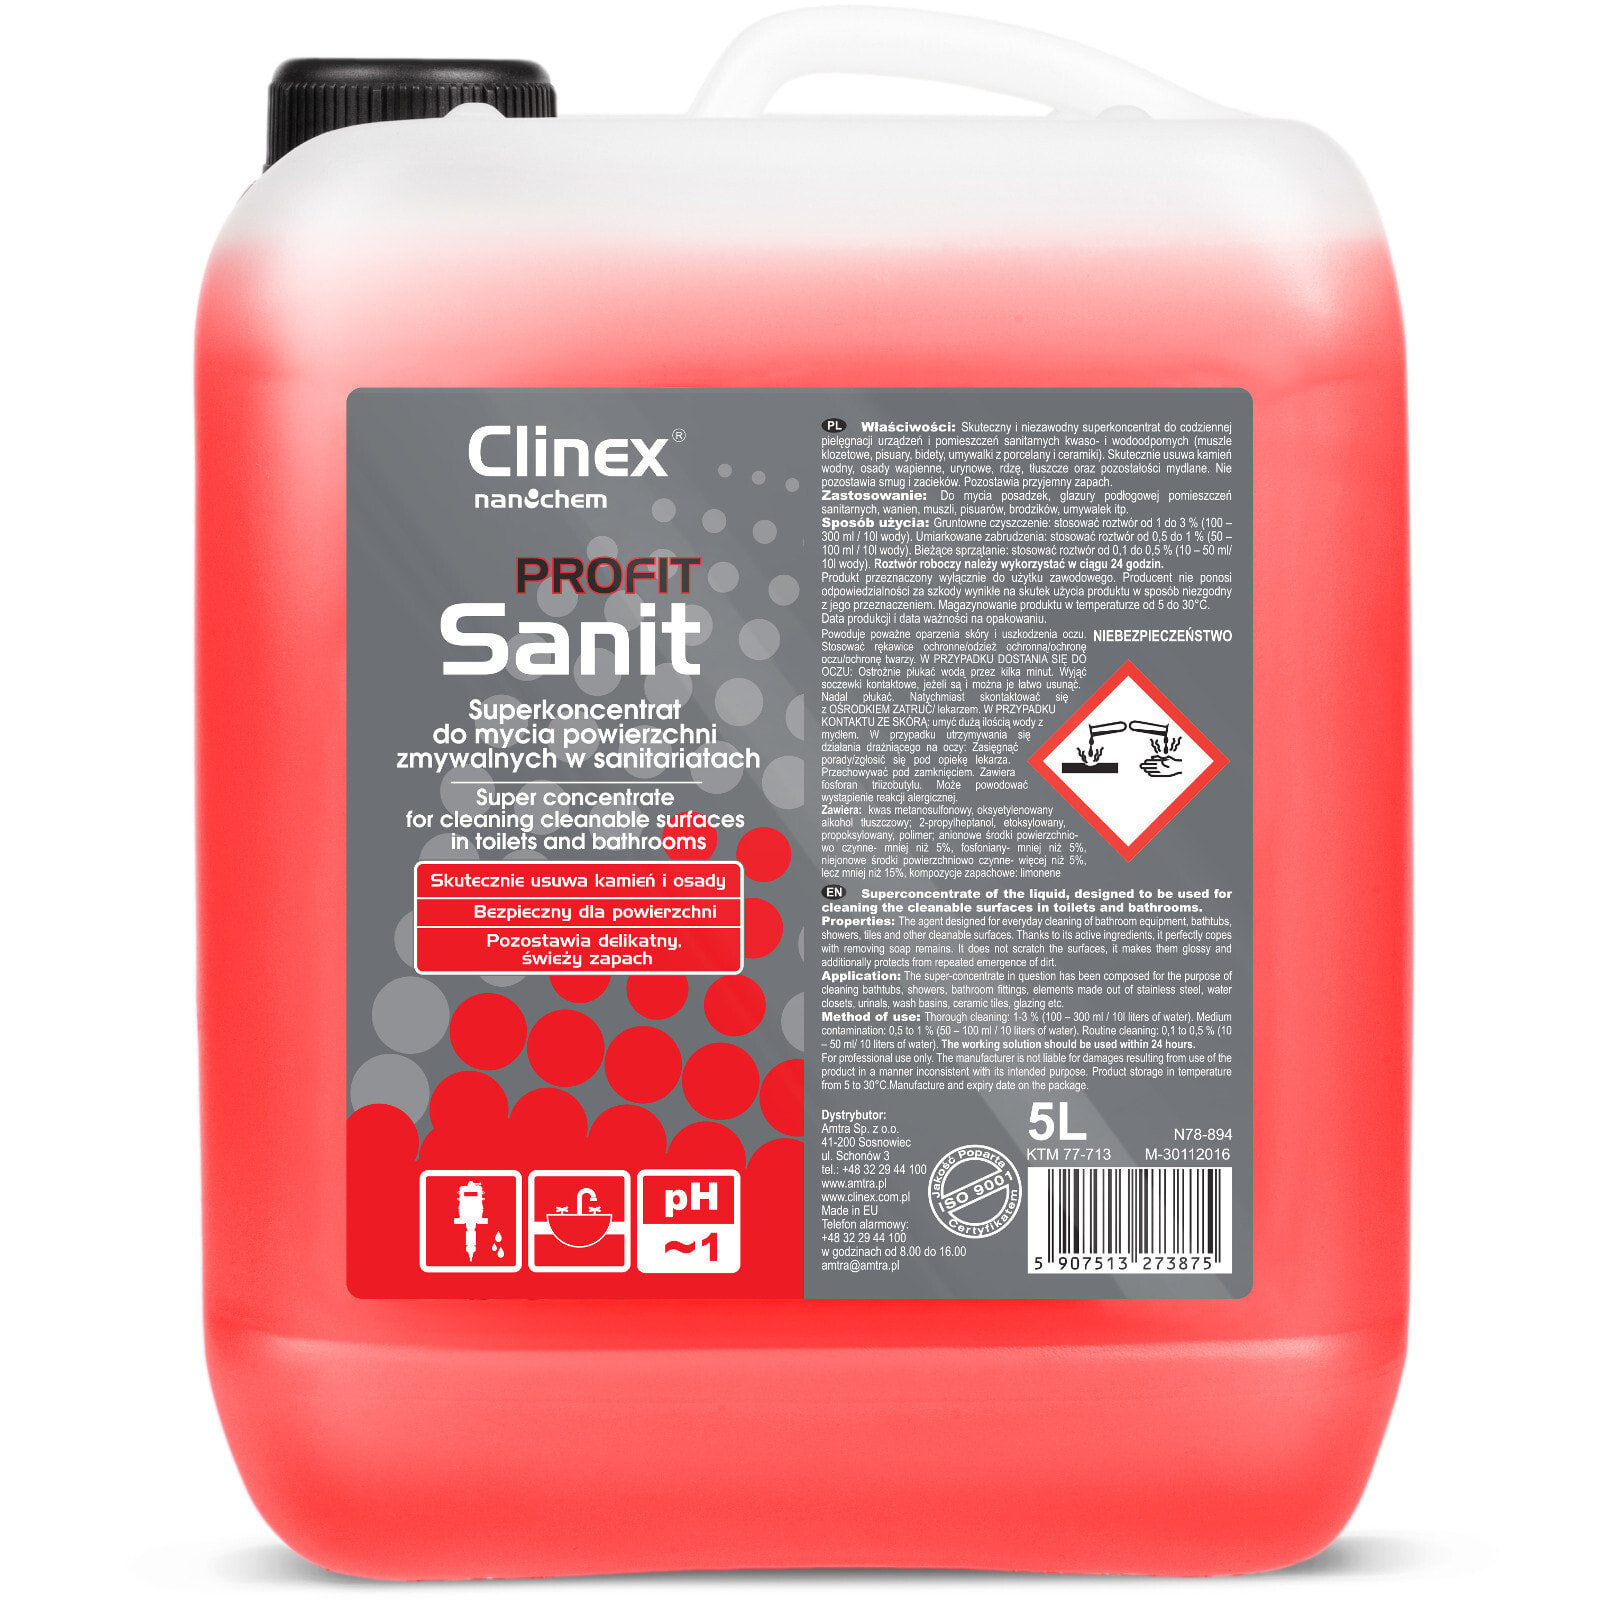 CLINEX PROFIT Sanit 5L strong concentrate for cleaning toilets, tiles, bathtubs, urinals, washbasins.